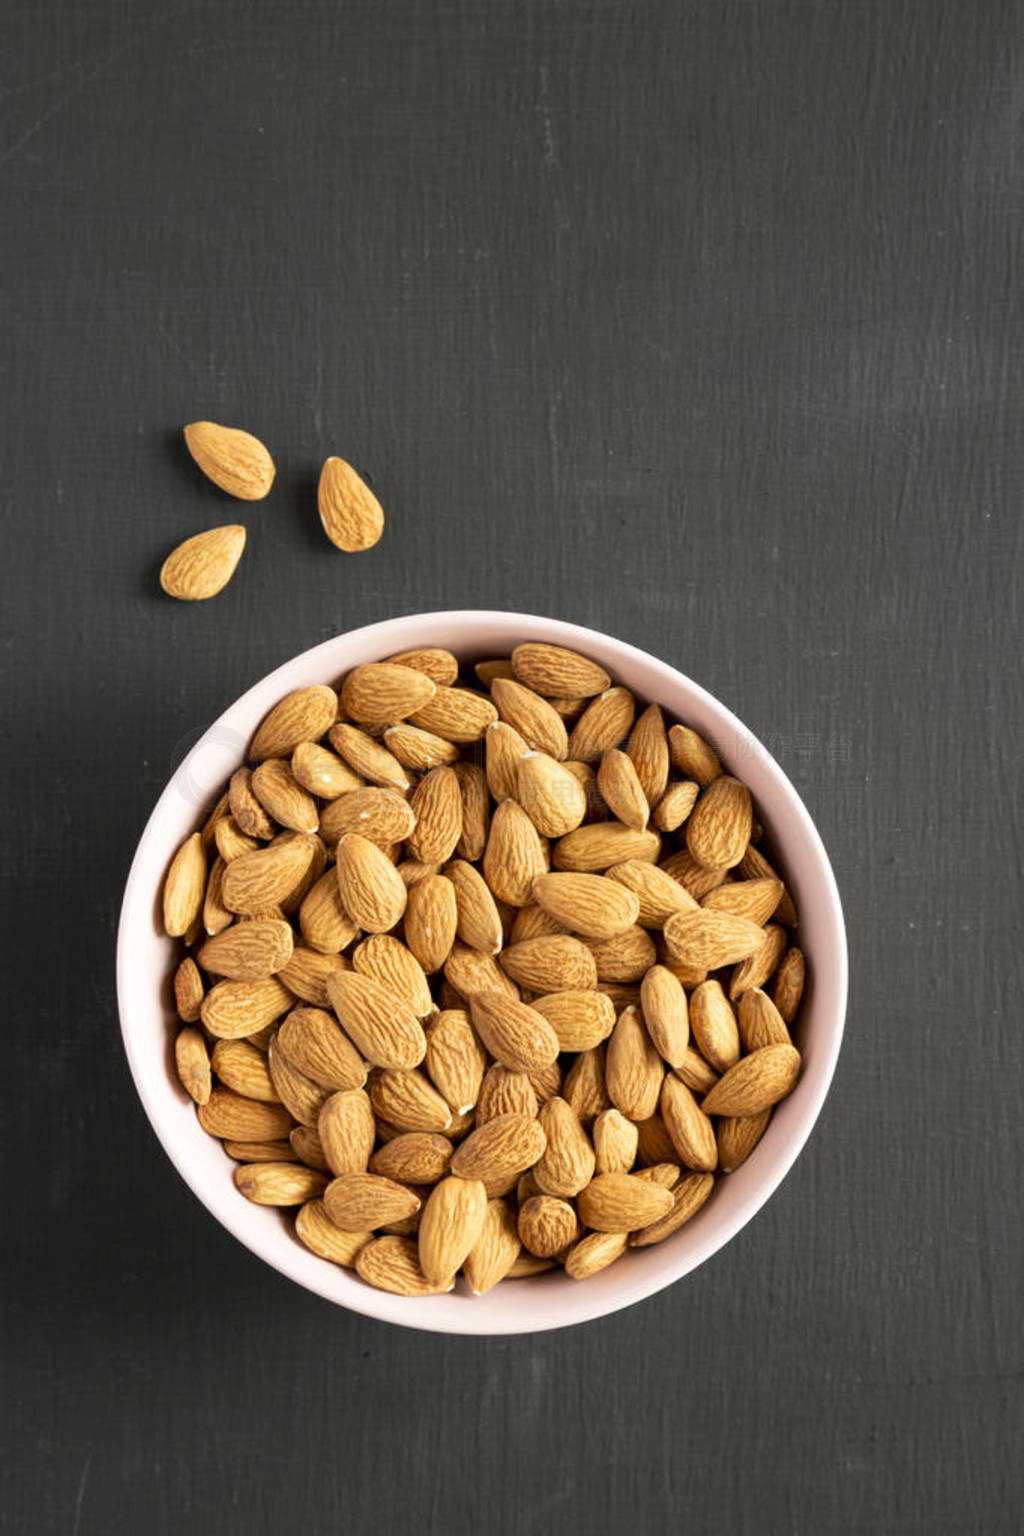 Full pink bowl of almonds over black background, overhead view.